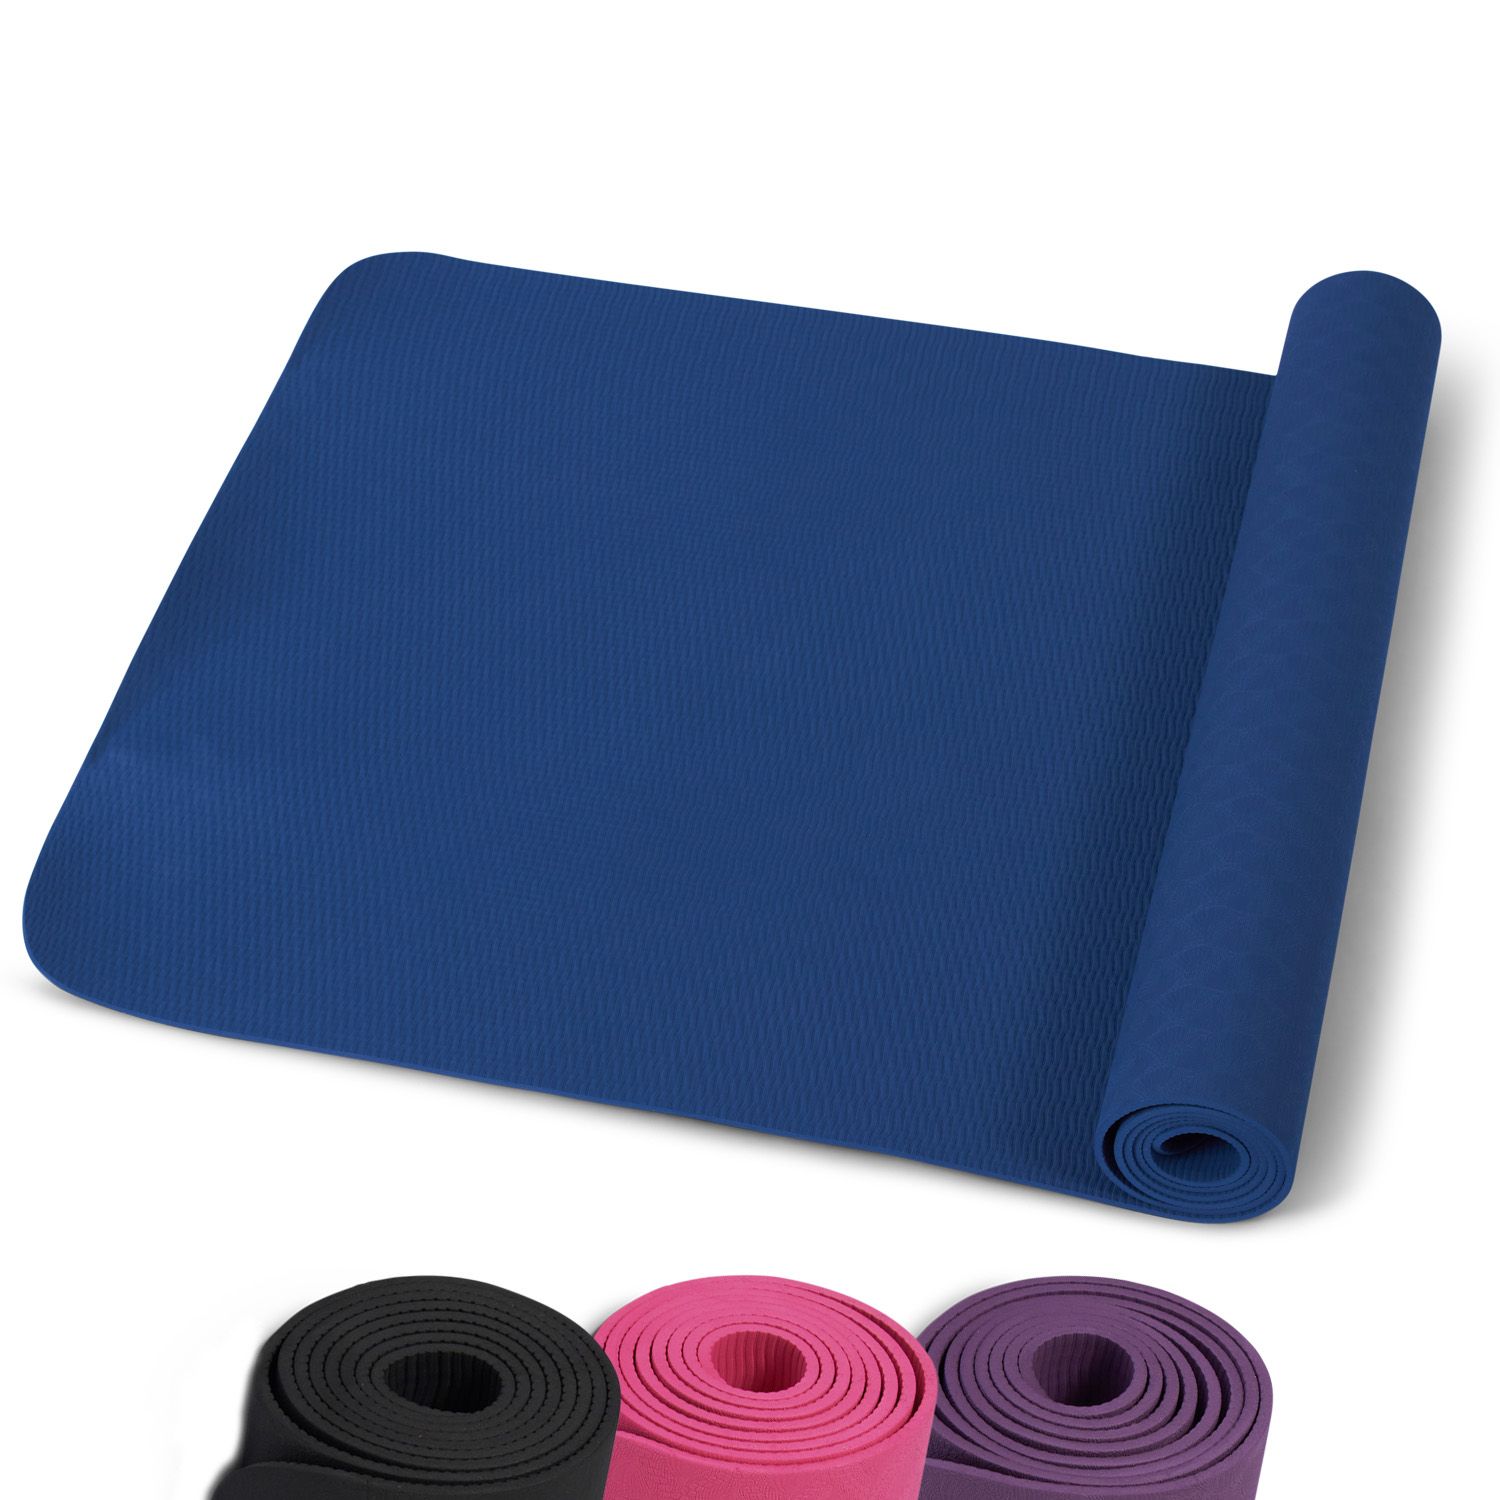 gladiator sports yoga mat blue different colors